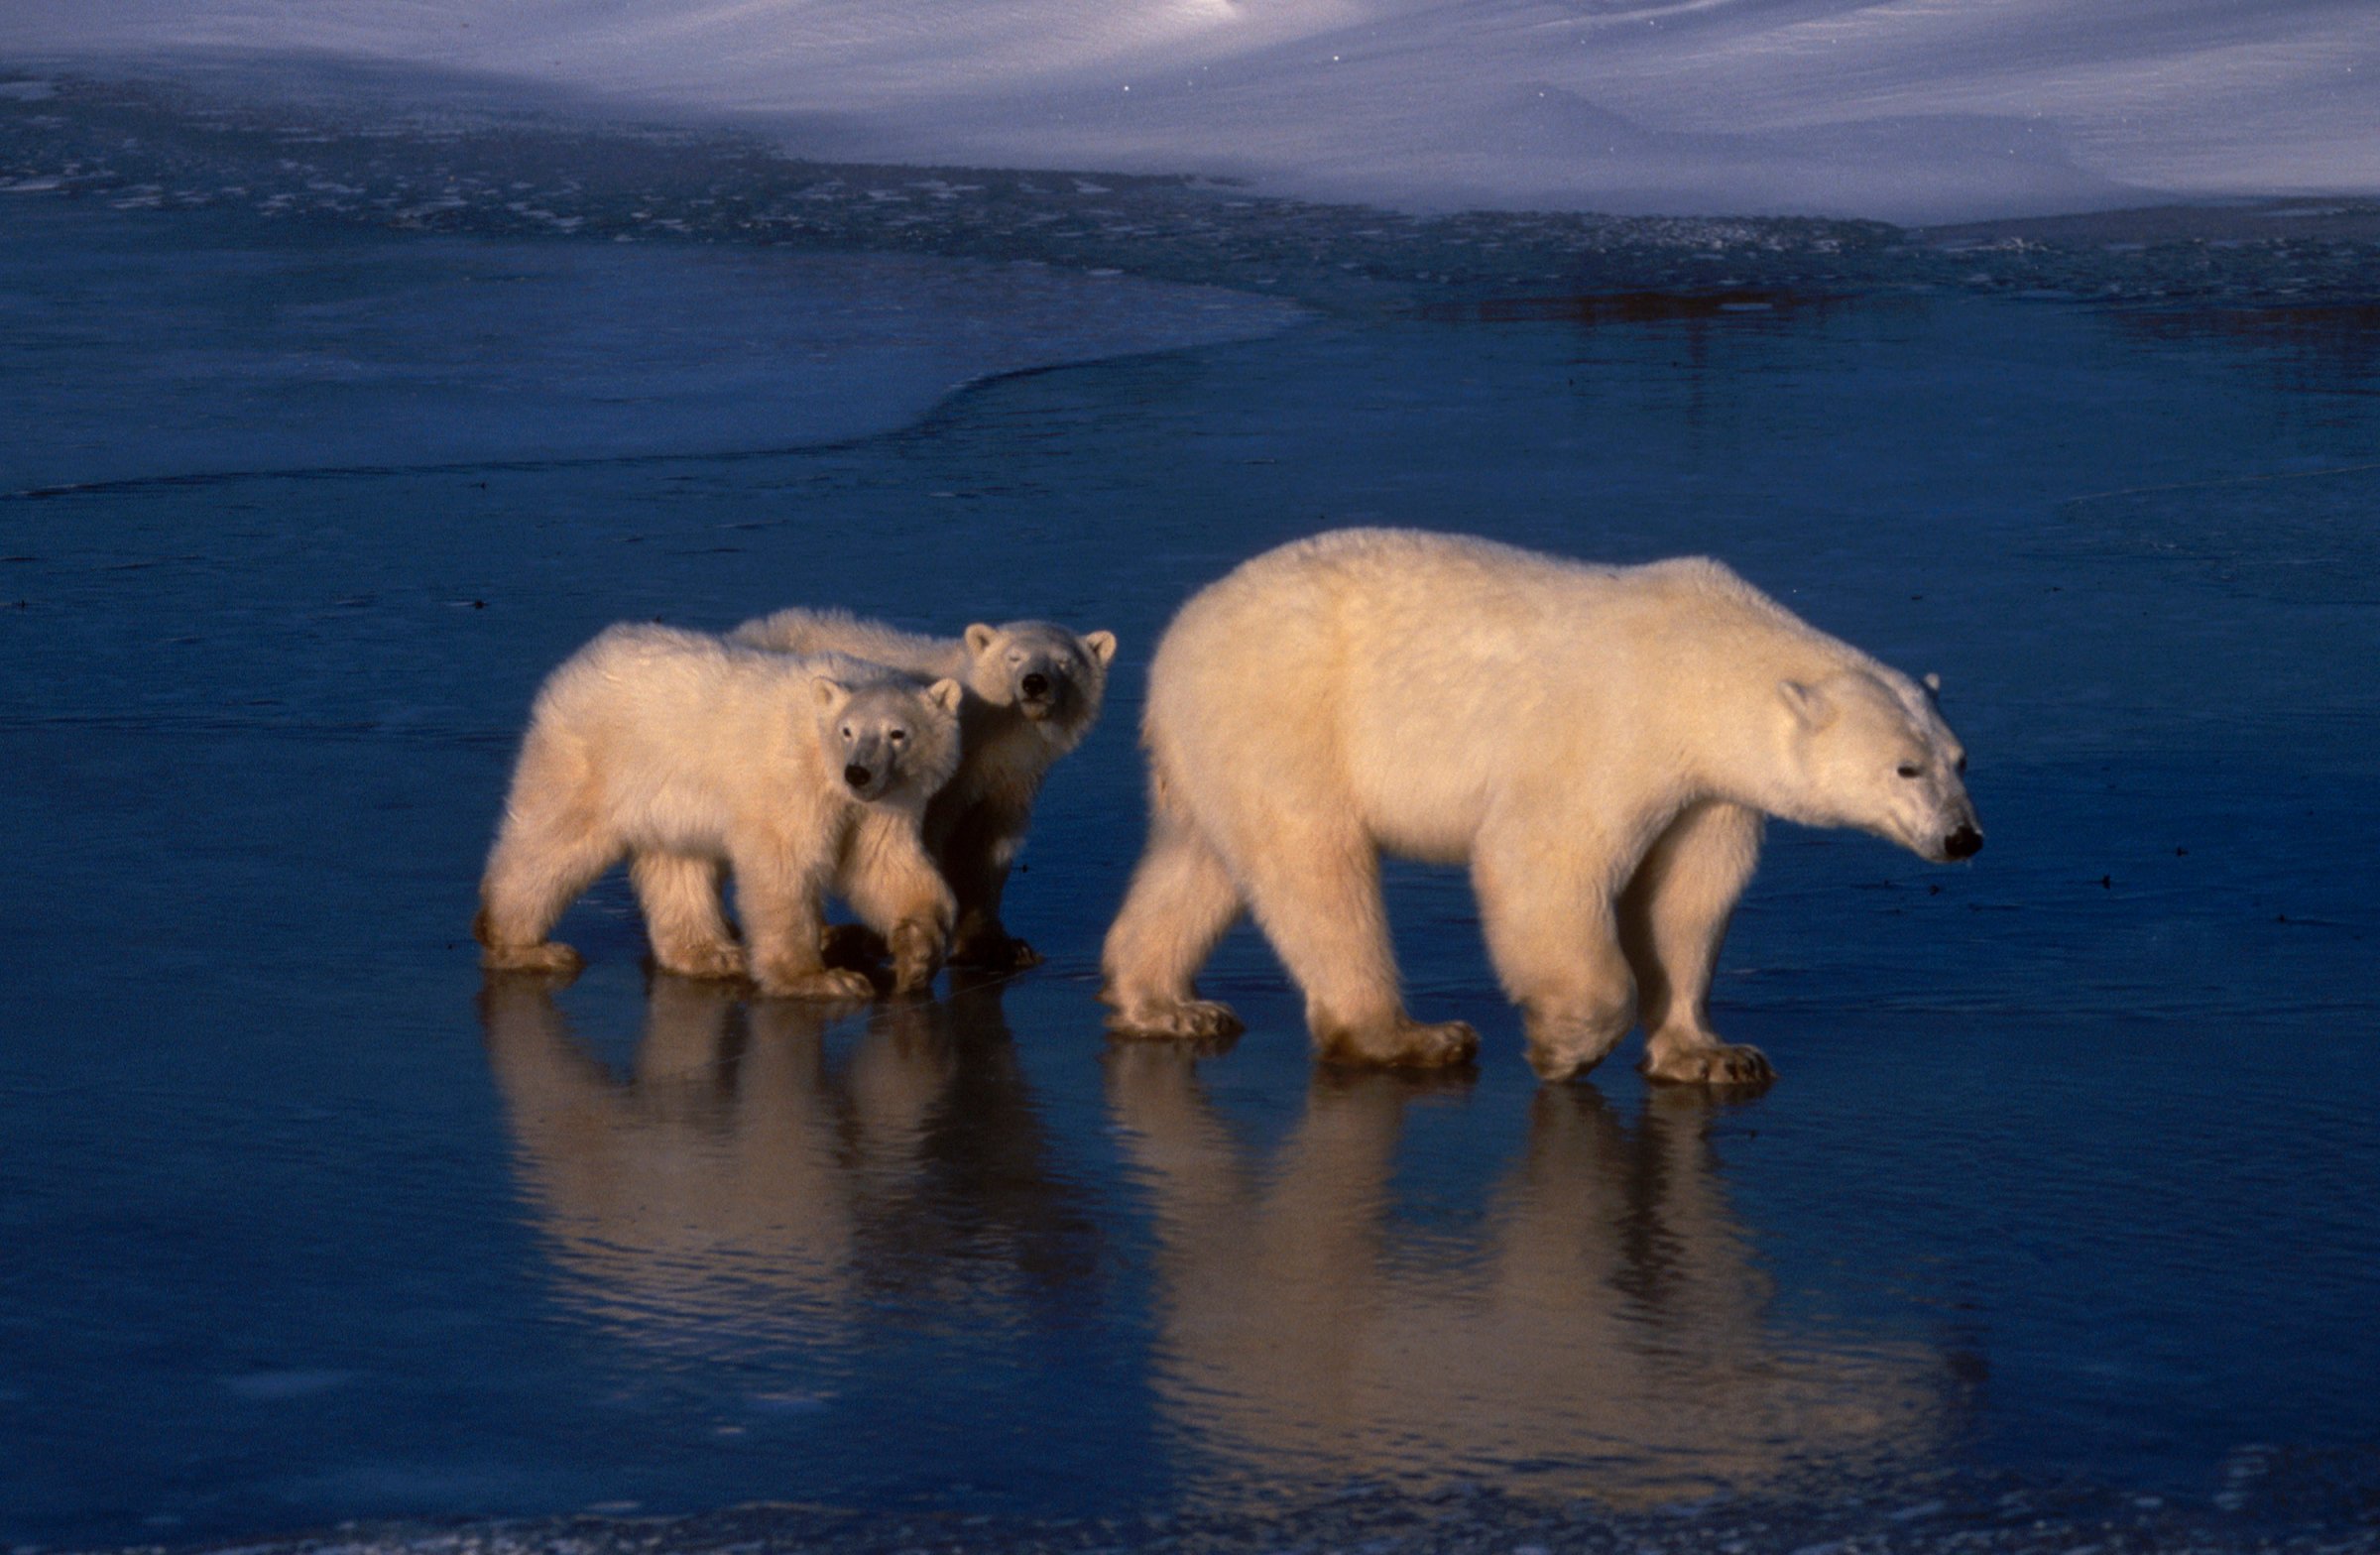 A pair of polar bear cubs following their mother on ice at Hudson Bay, Canada, from the opening episode of Discovery's "Planet Earth" series.